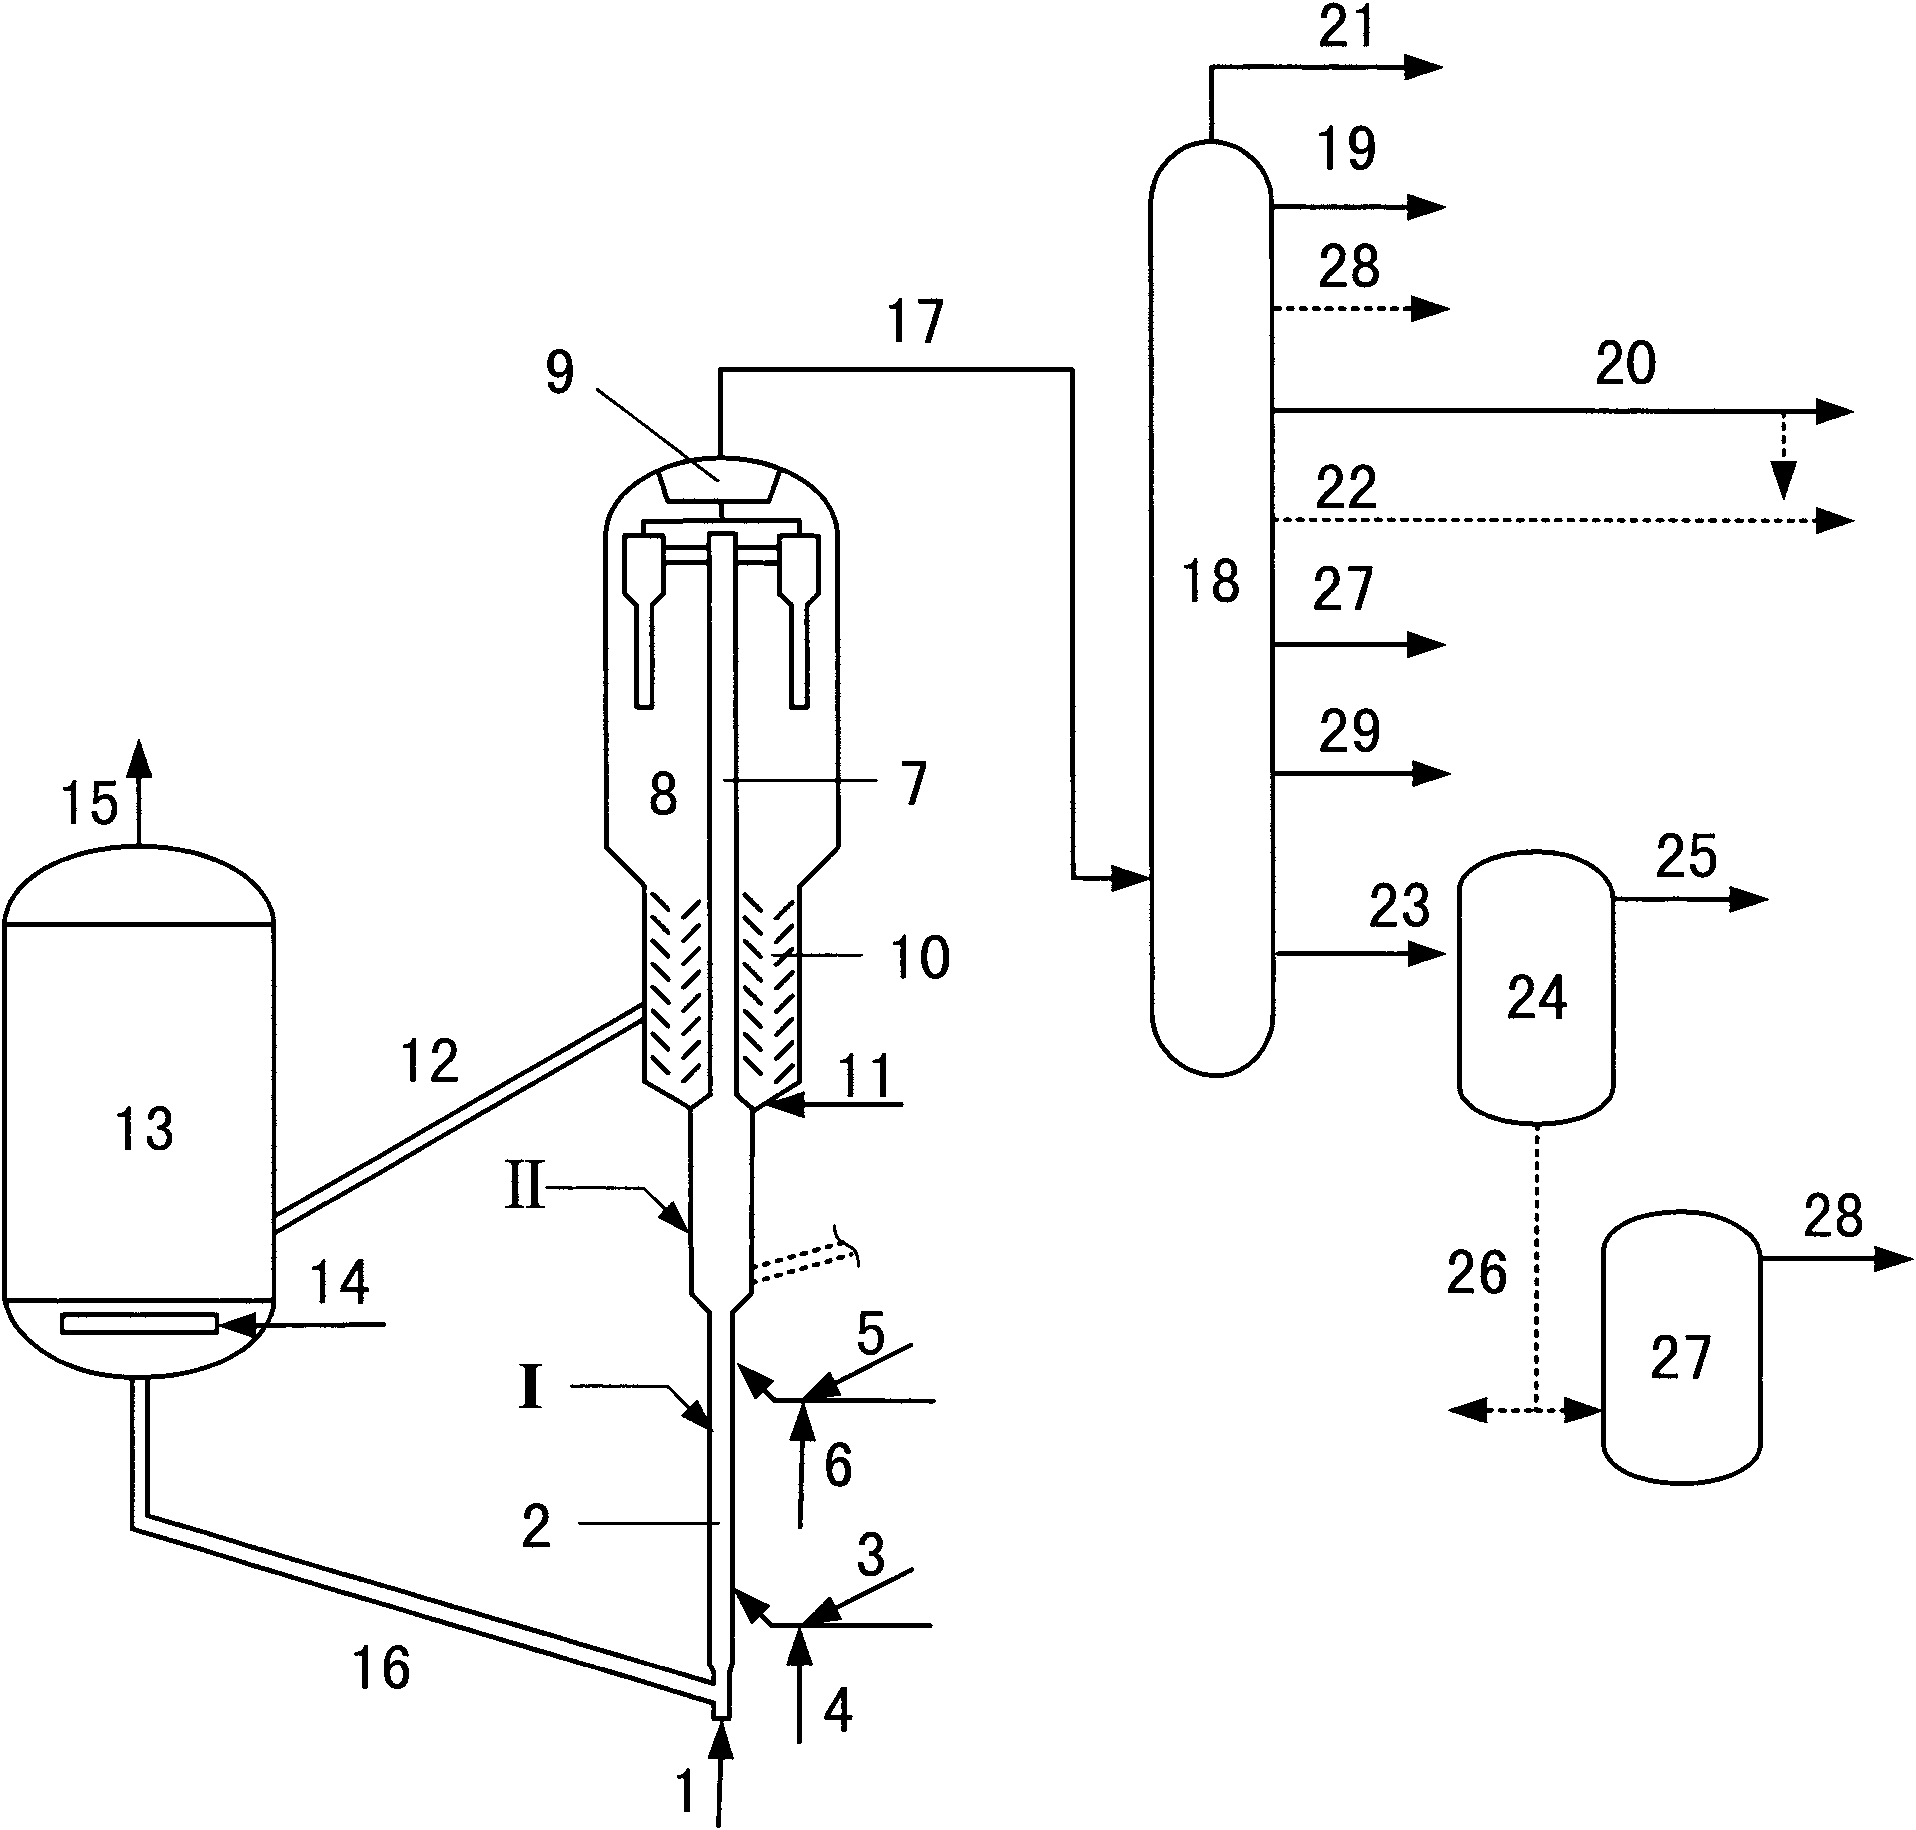 Method for preparing high-quality fuel oil from inferior crude oil